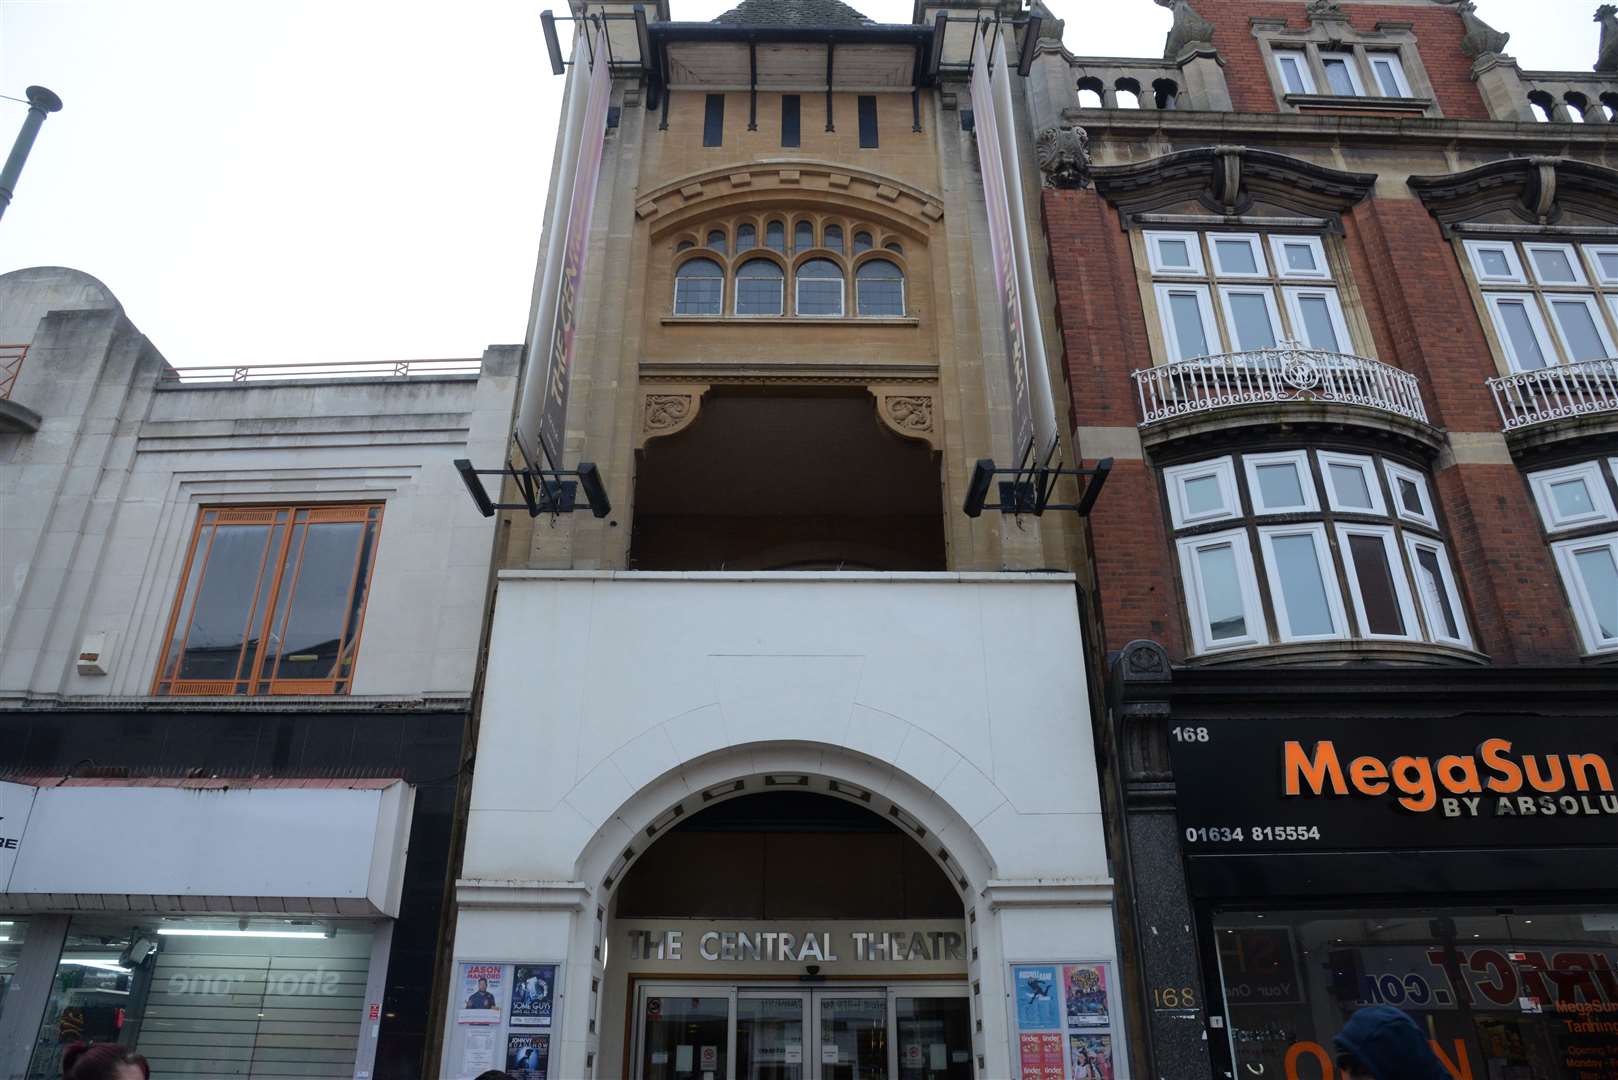 Adrian Edwards was found asleep after breaking in to the Central Theatre in Chatham